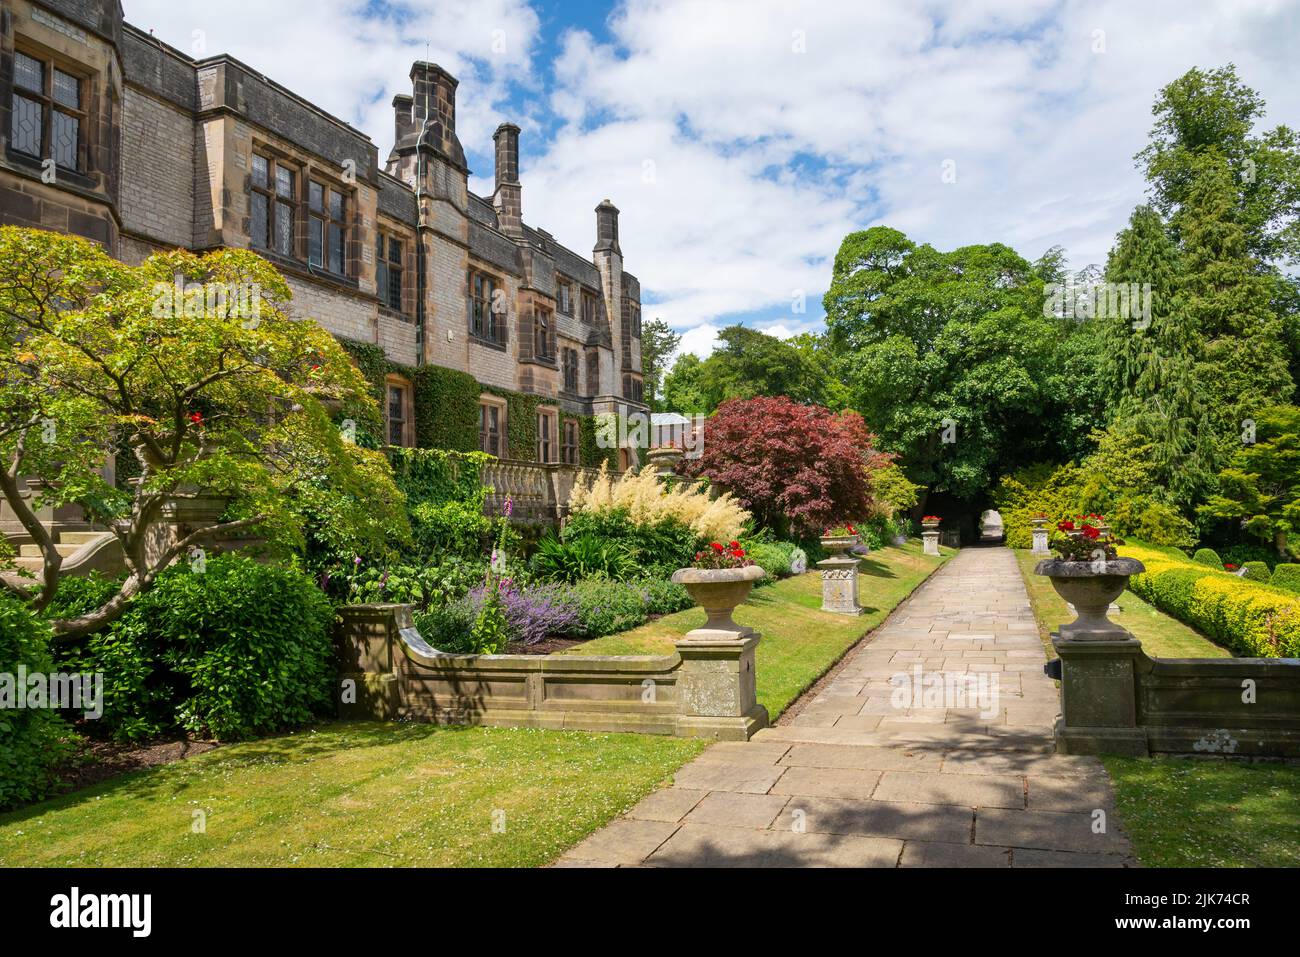 Thornbridge Hall and gardens near Bakewell in the Peak District, Derbyshire, England. Stock Photo